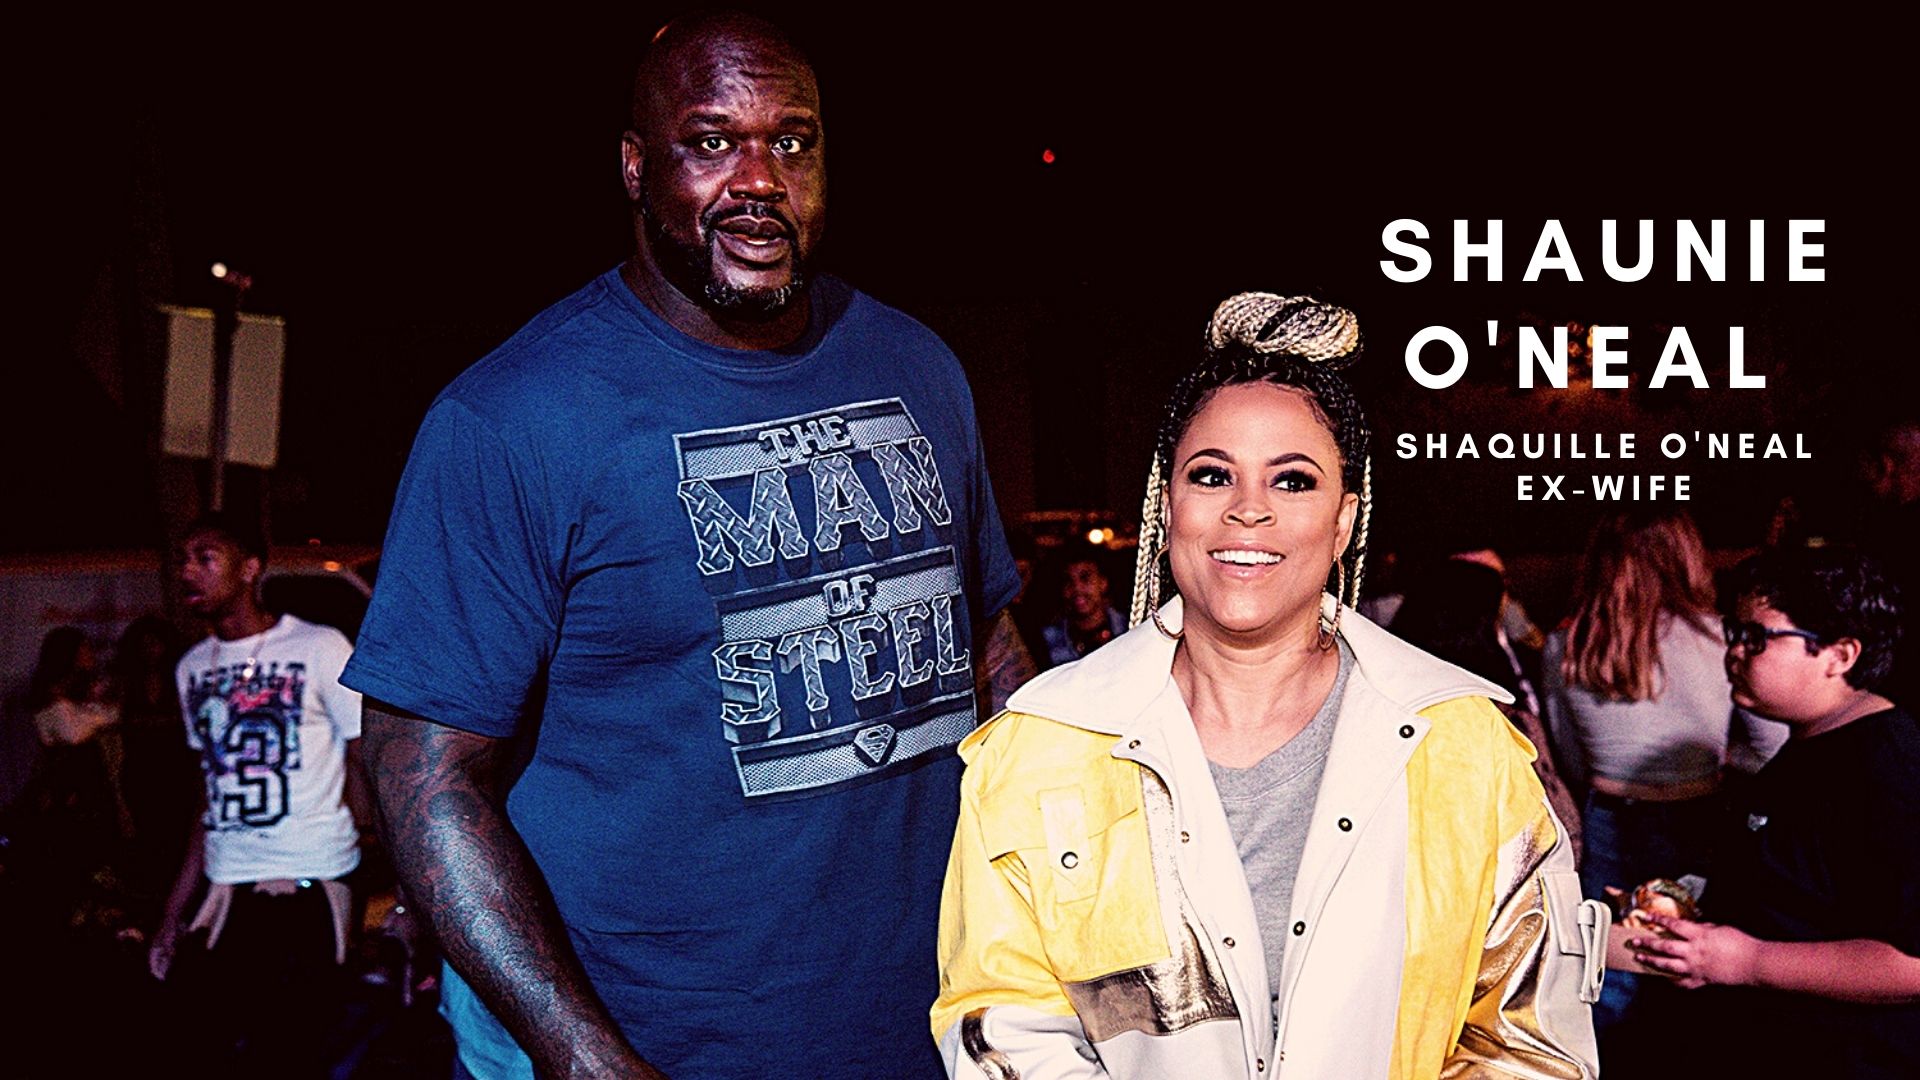 Shaunie O'Neal is the former wife of NBA legend Shaquille O'Neal ...